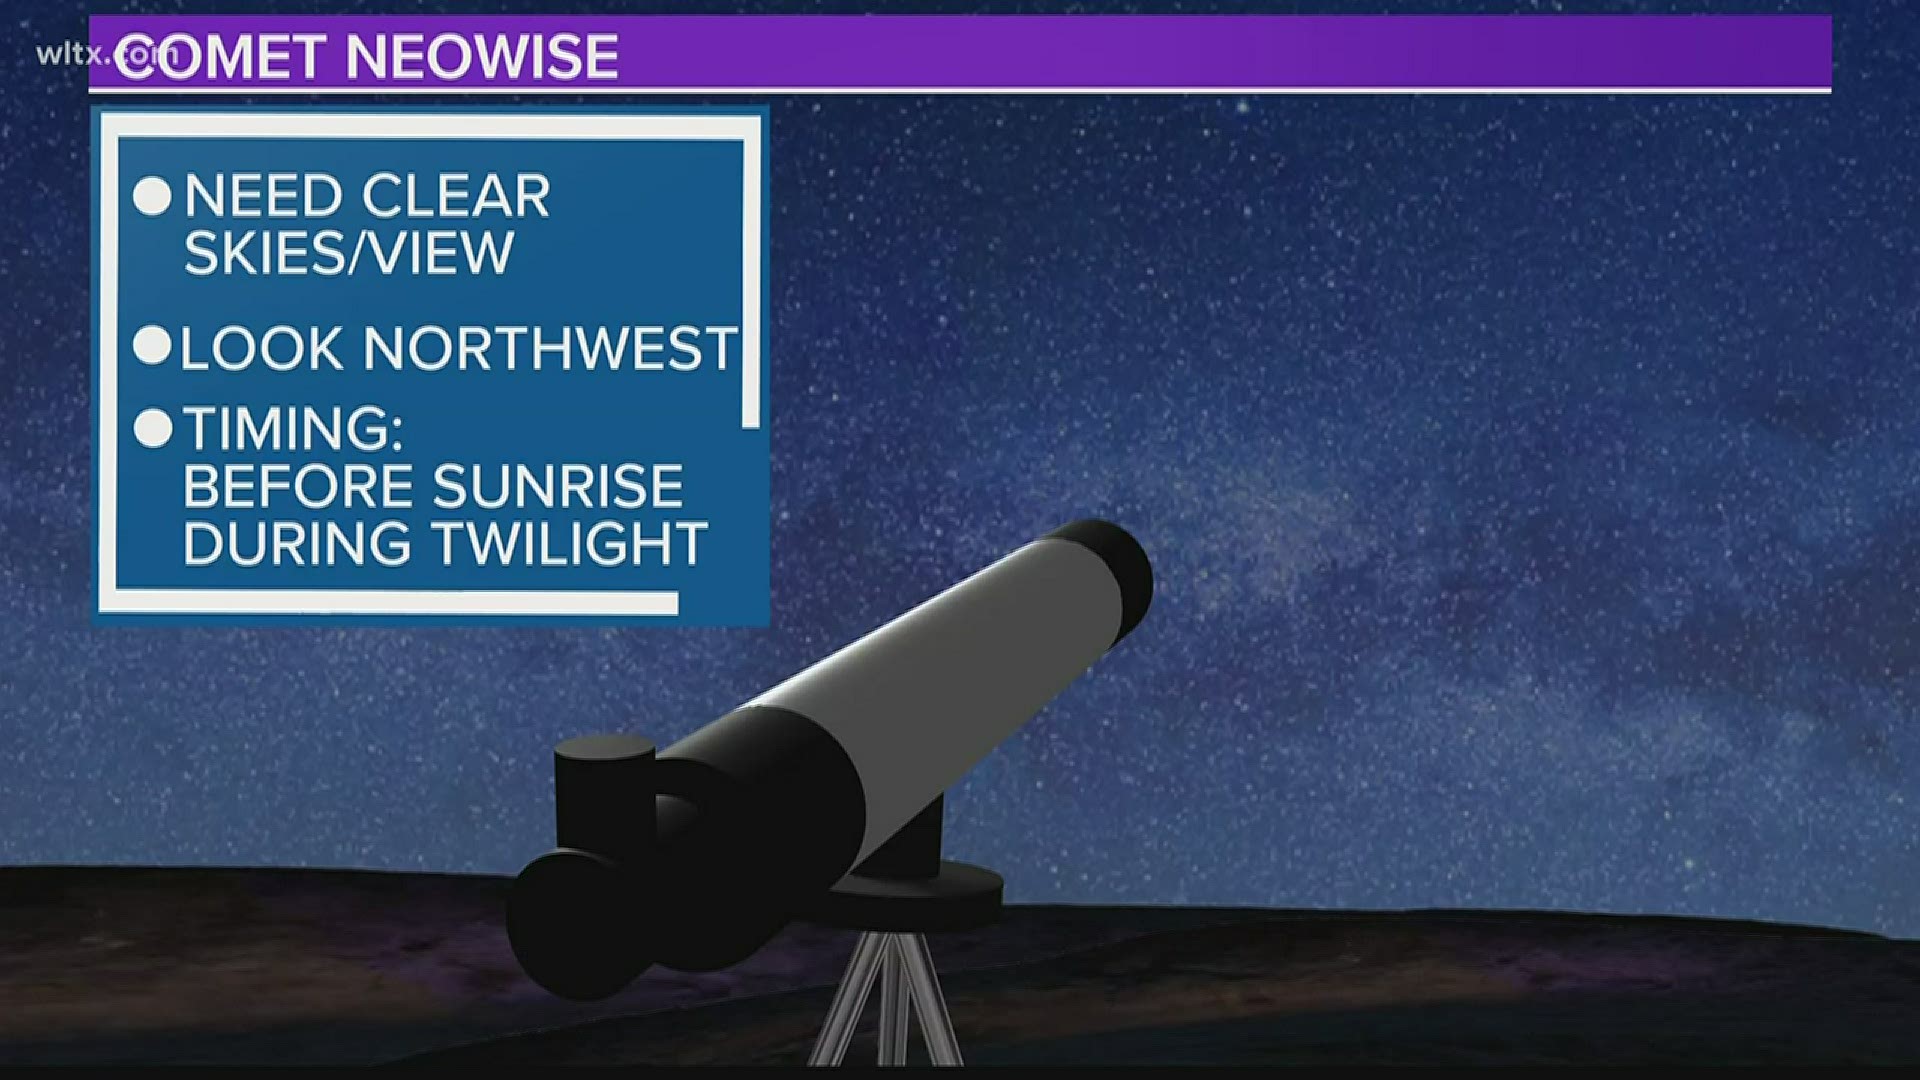 You should be able to see the comet by looking to the northwest along the horizon. The viewing period to see it is between an hour or two before sunrise, and again i